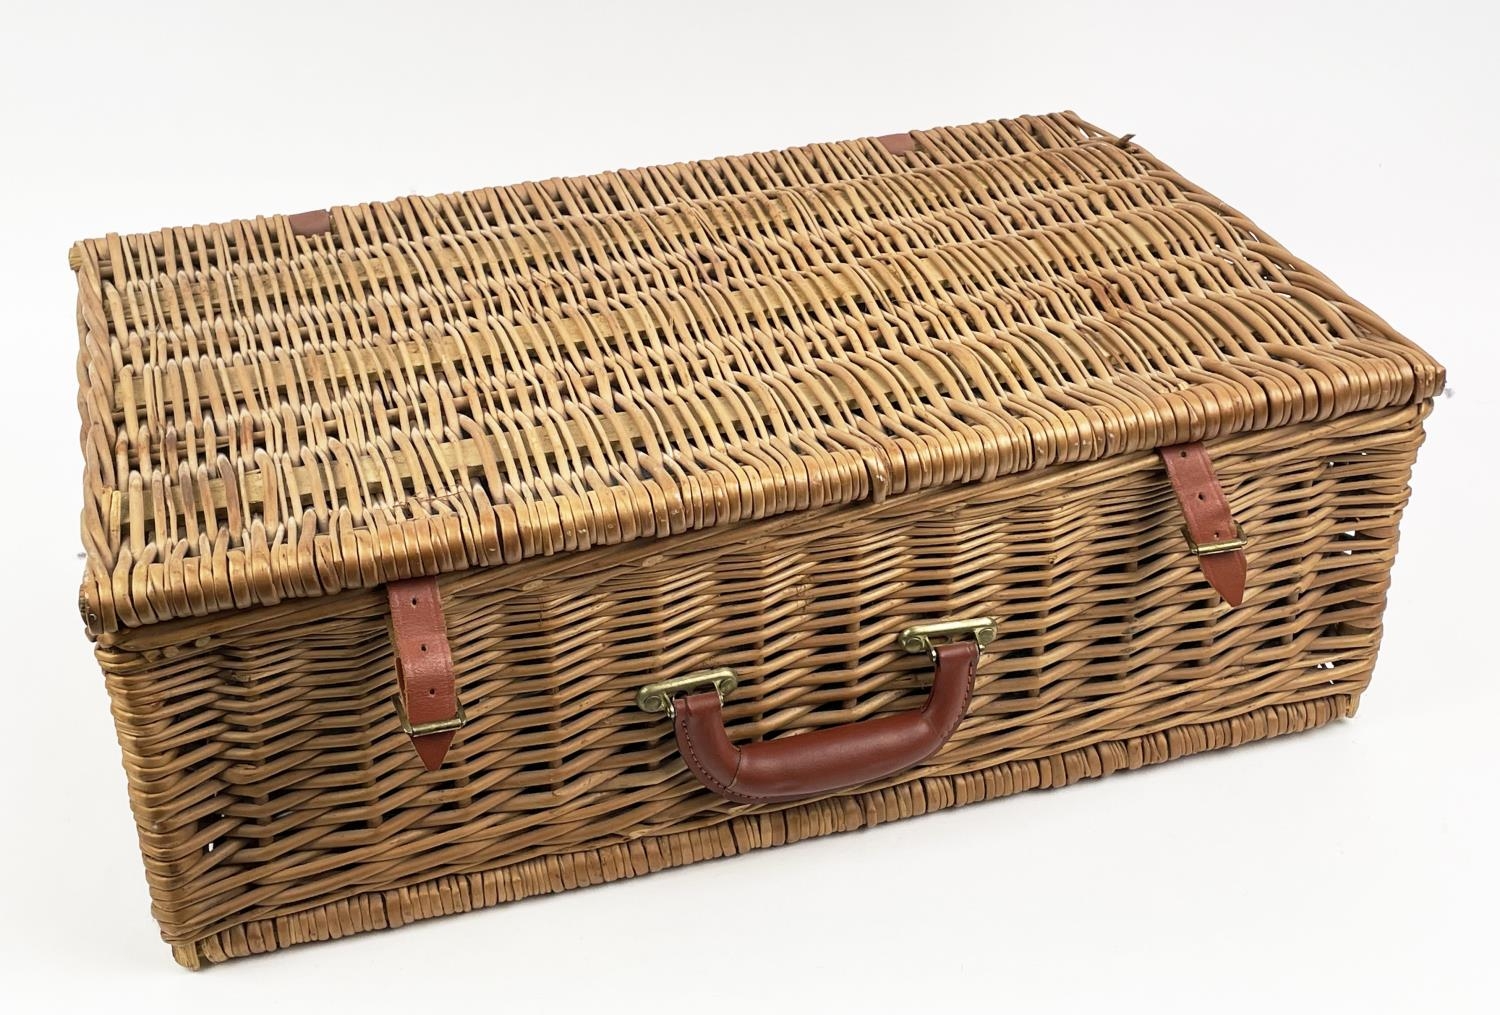 G.T.C. PICNIC BASKET, four place setting, including plates, cutlery, mugs, flask and tuperware in - Image 3 of 8